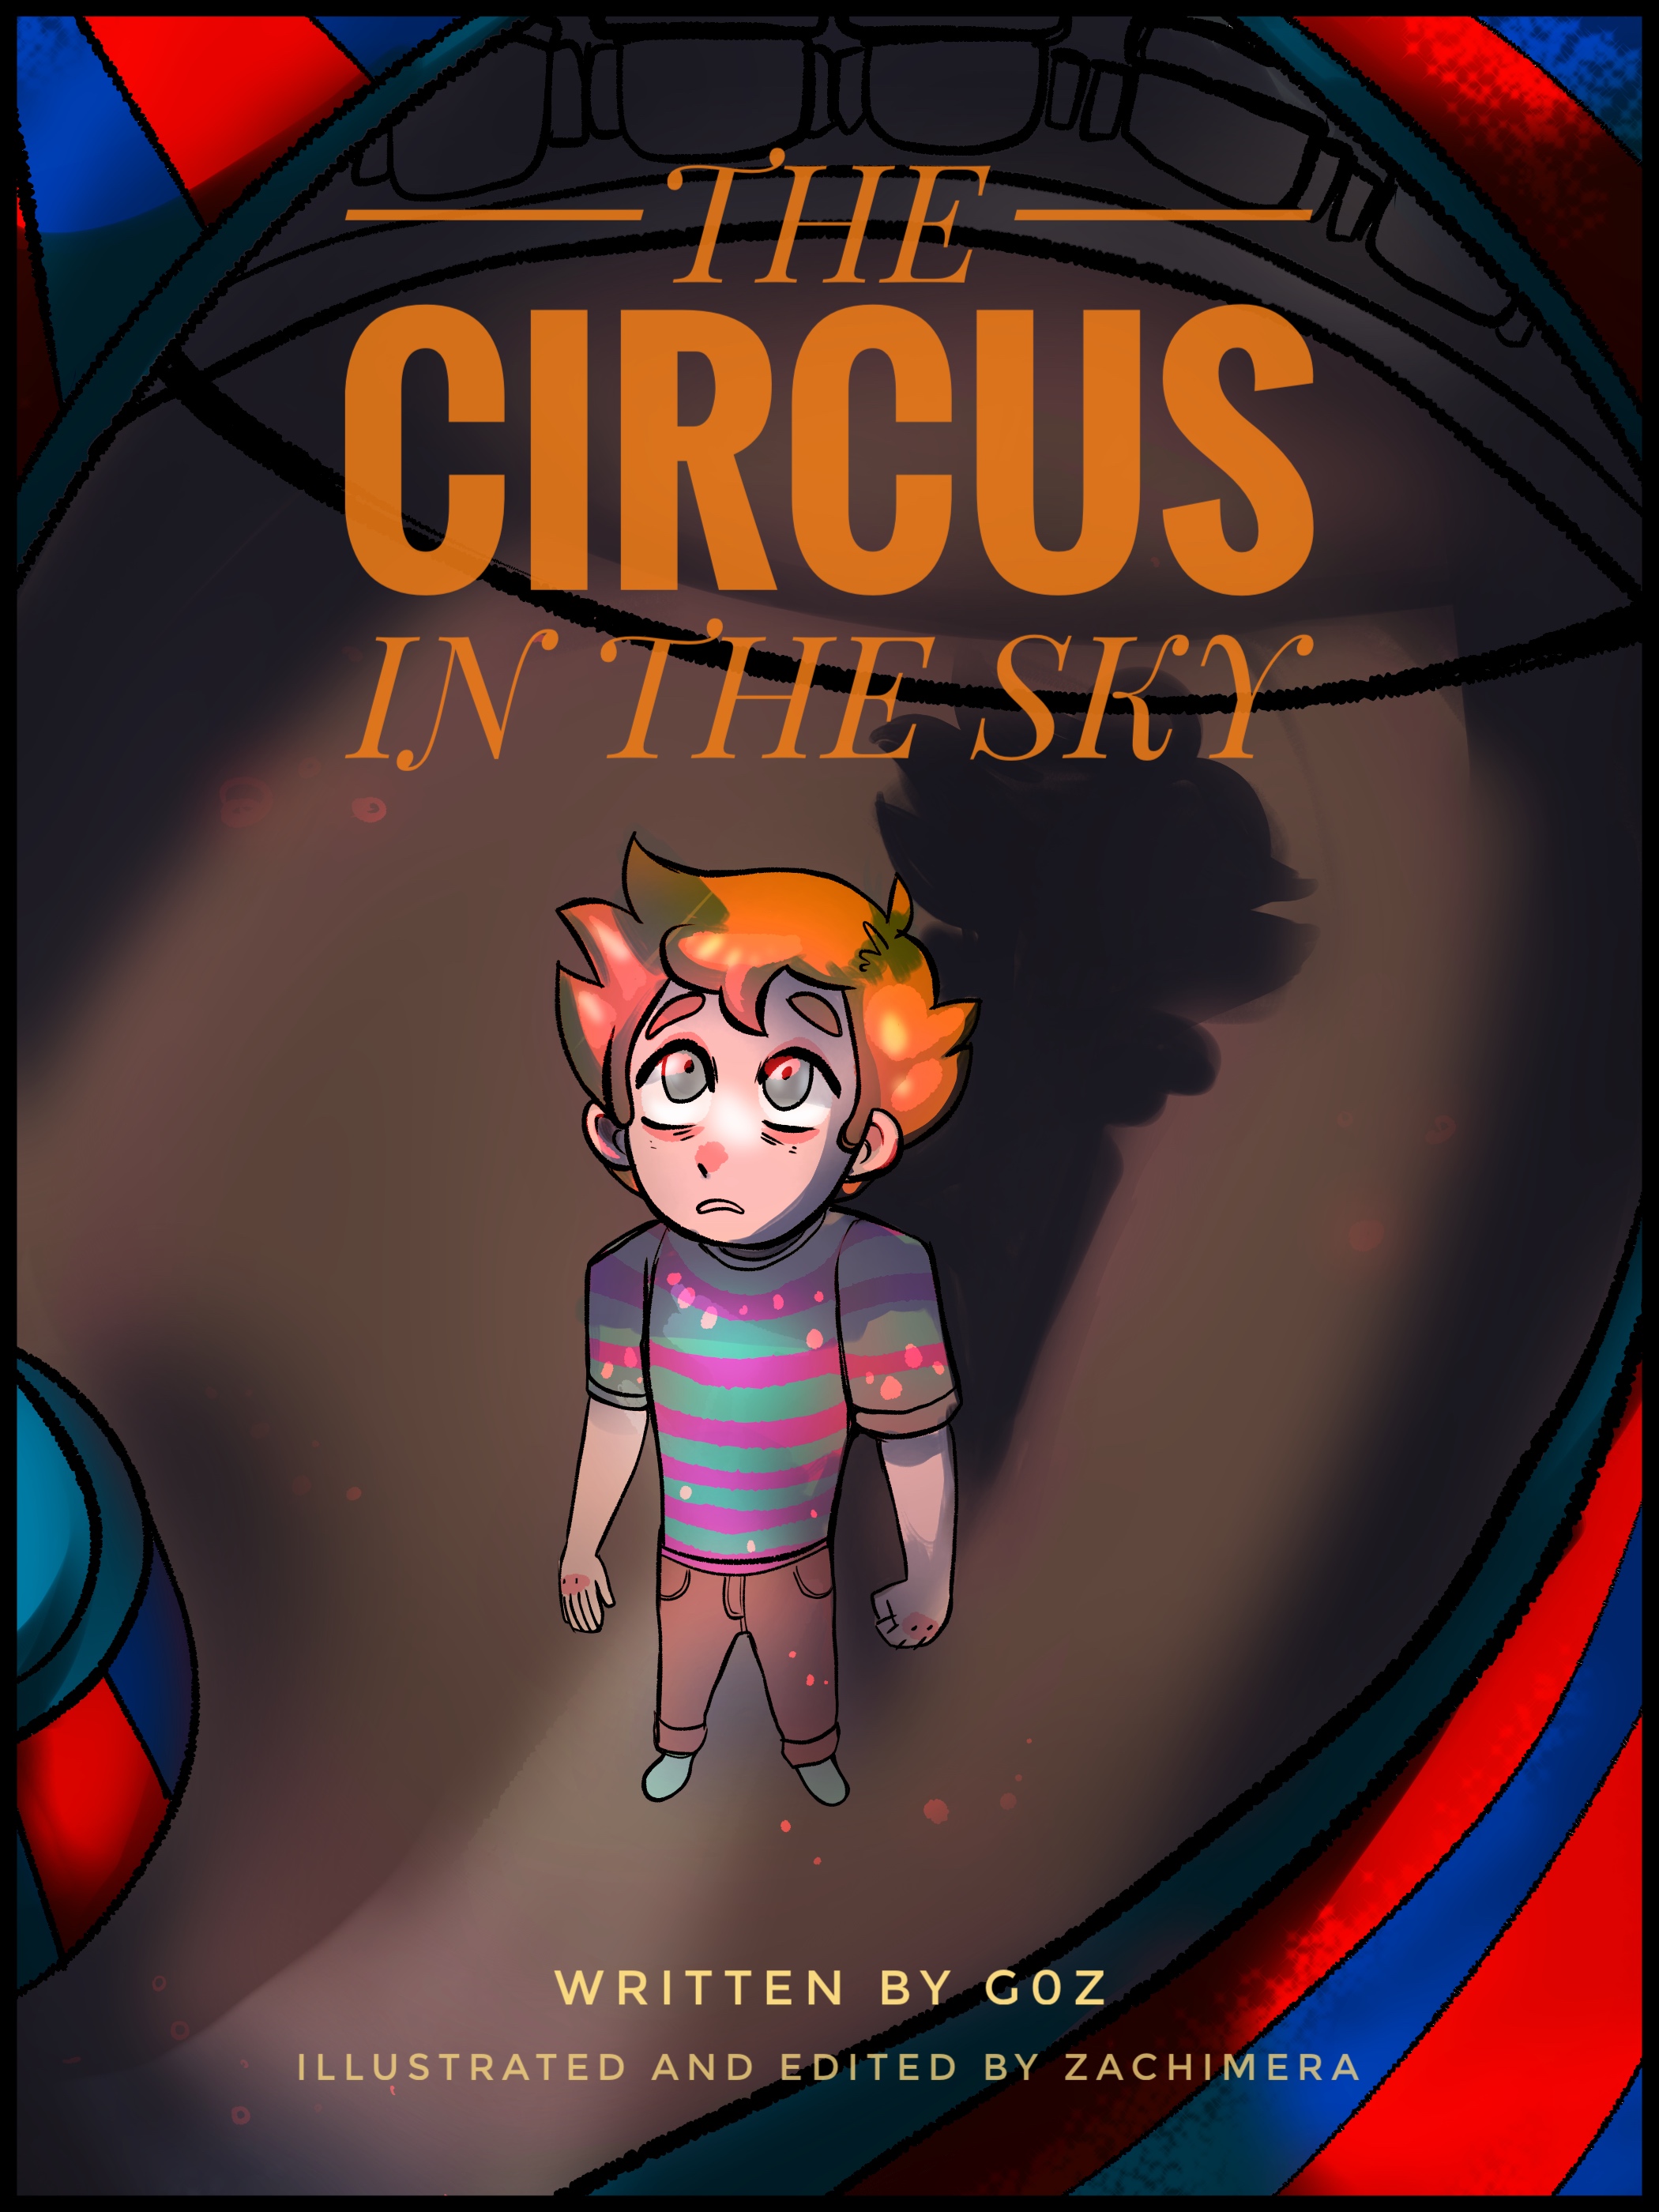 The Circus In The Sky Welcome To The Circus - roblox circus in the sky